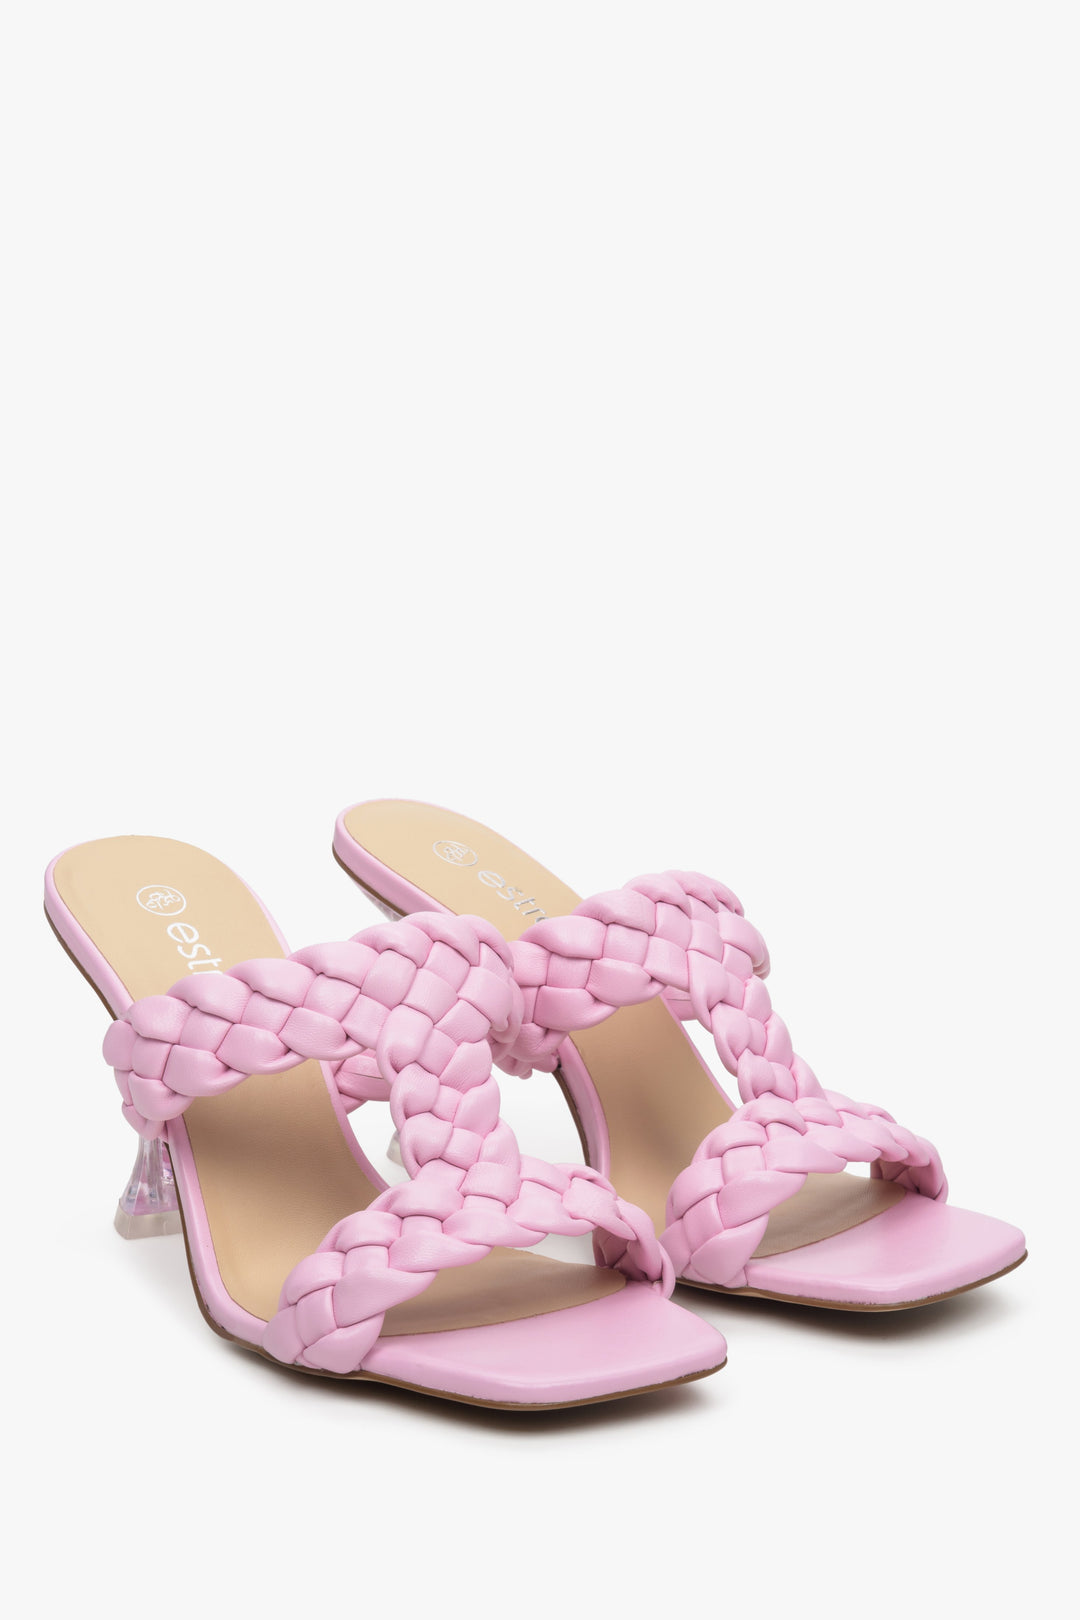 Pink Leather women's mules on a funnel heel, Estro brand.